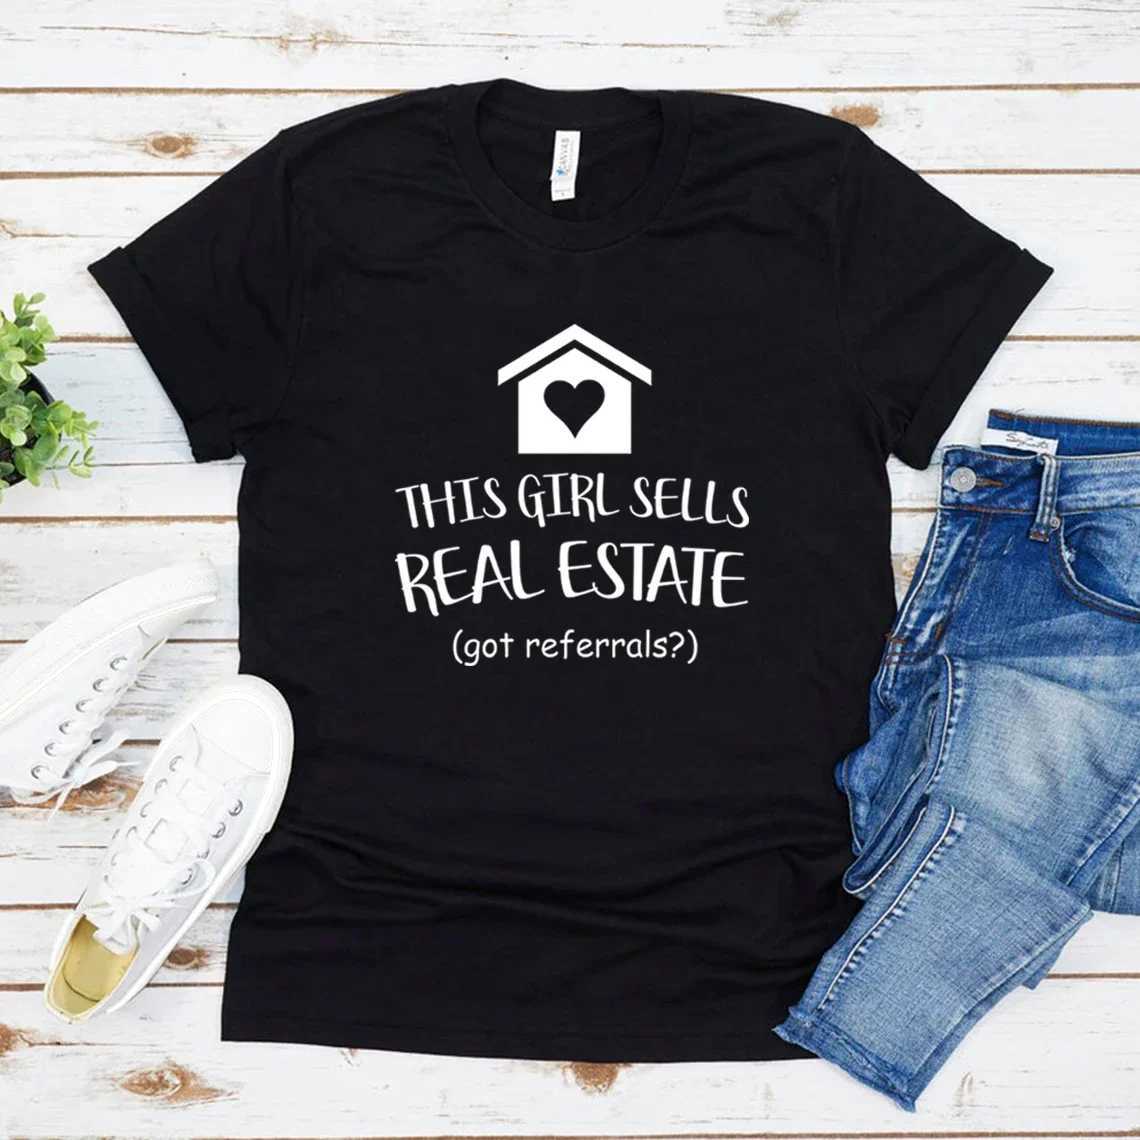 Women's T-Shirt This Girl Sells Real Estate T Shirt Realtor Tops for Real Estate Agent Short Slve Top Casual Breathable T Women Clothing Y240509